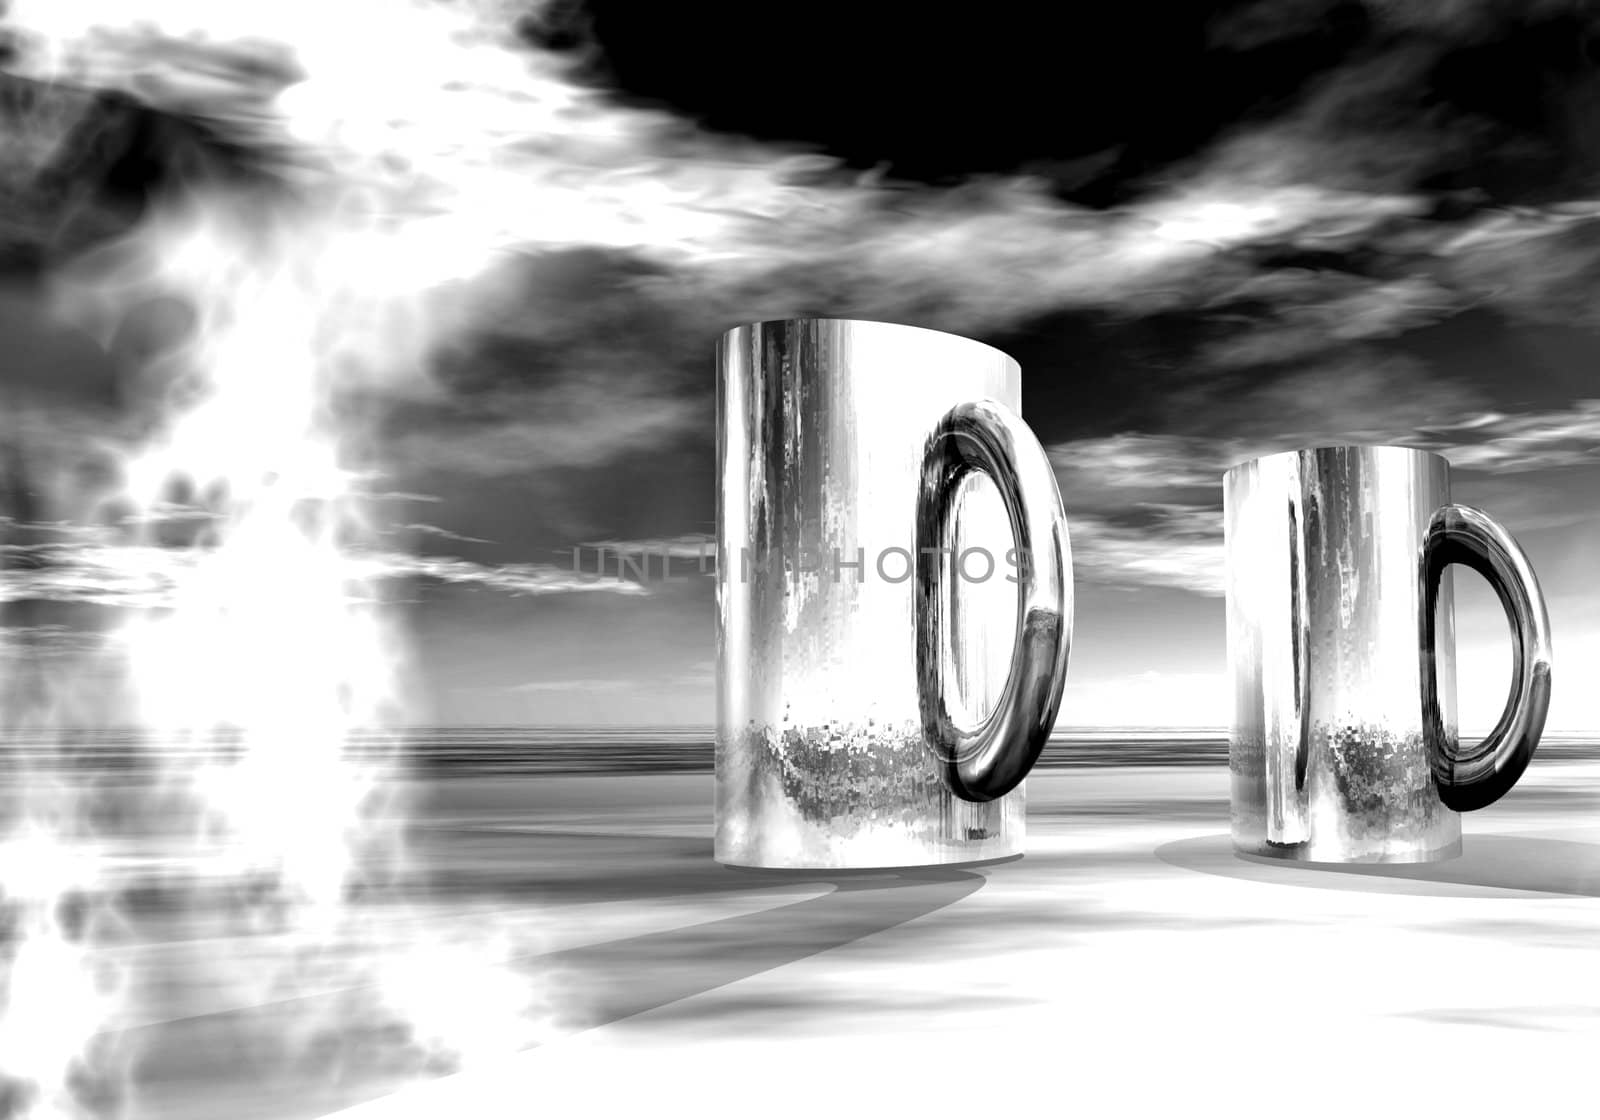 abstract image of a pair of mugs